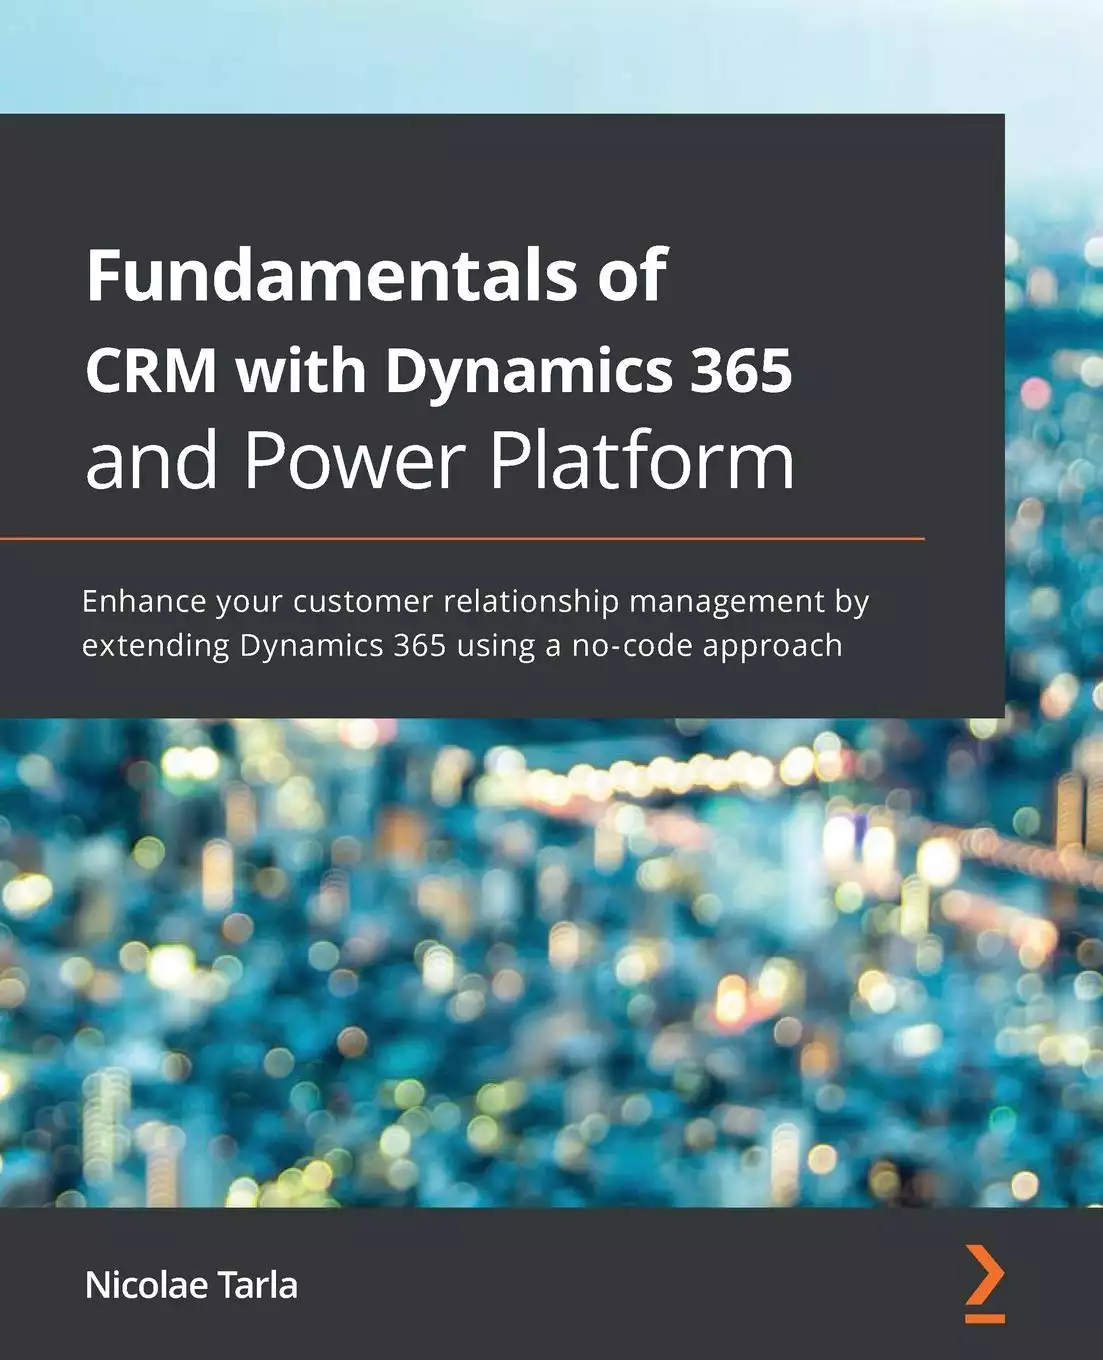 CRM with Dynamics 365